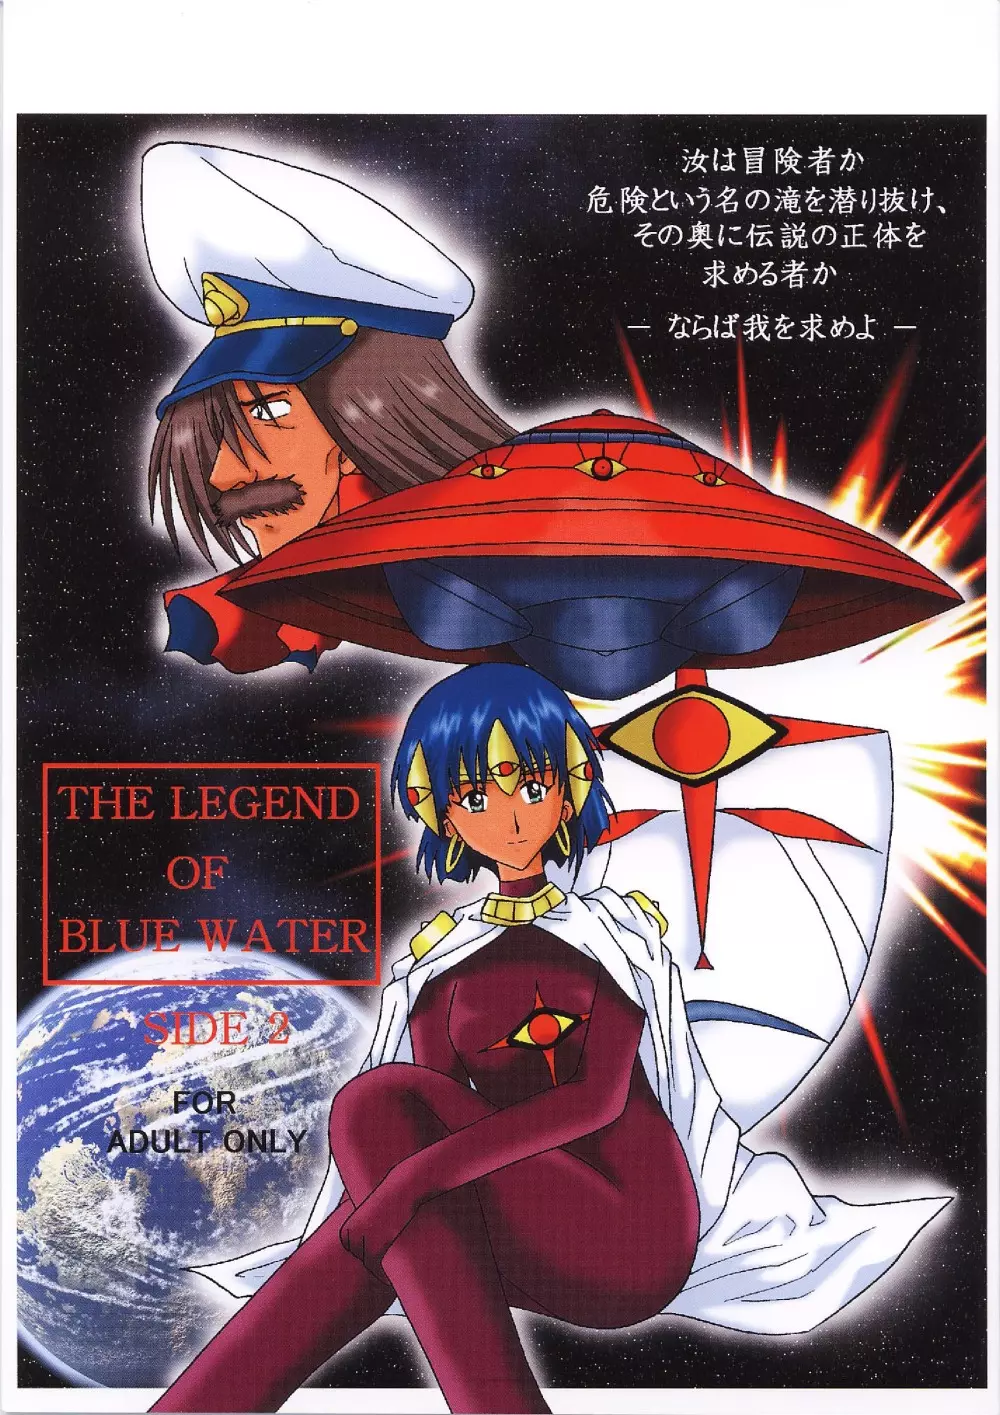 THE LEGEND OF BLUE WATER SIDE 2